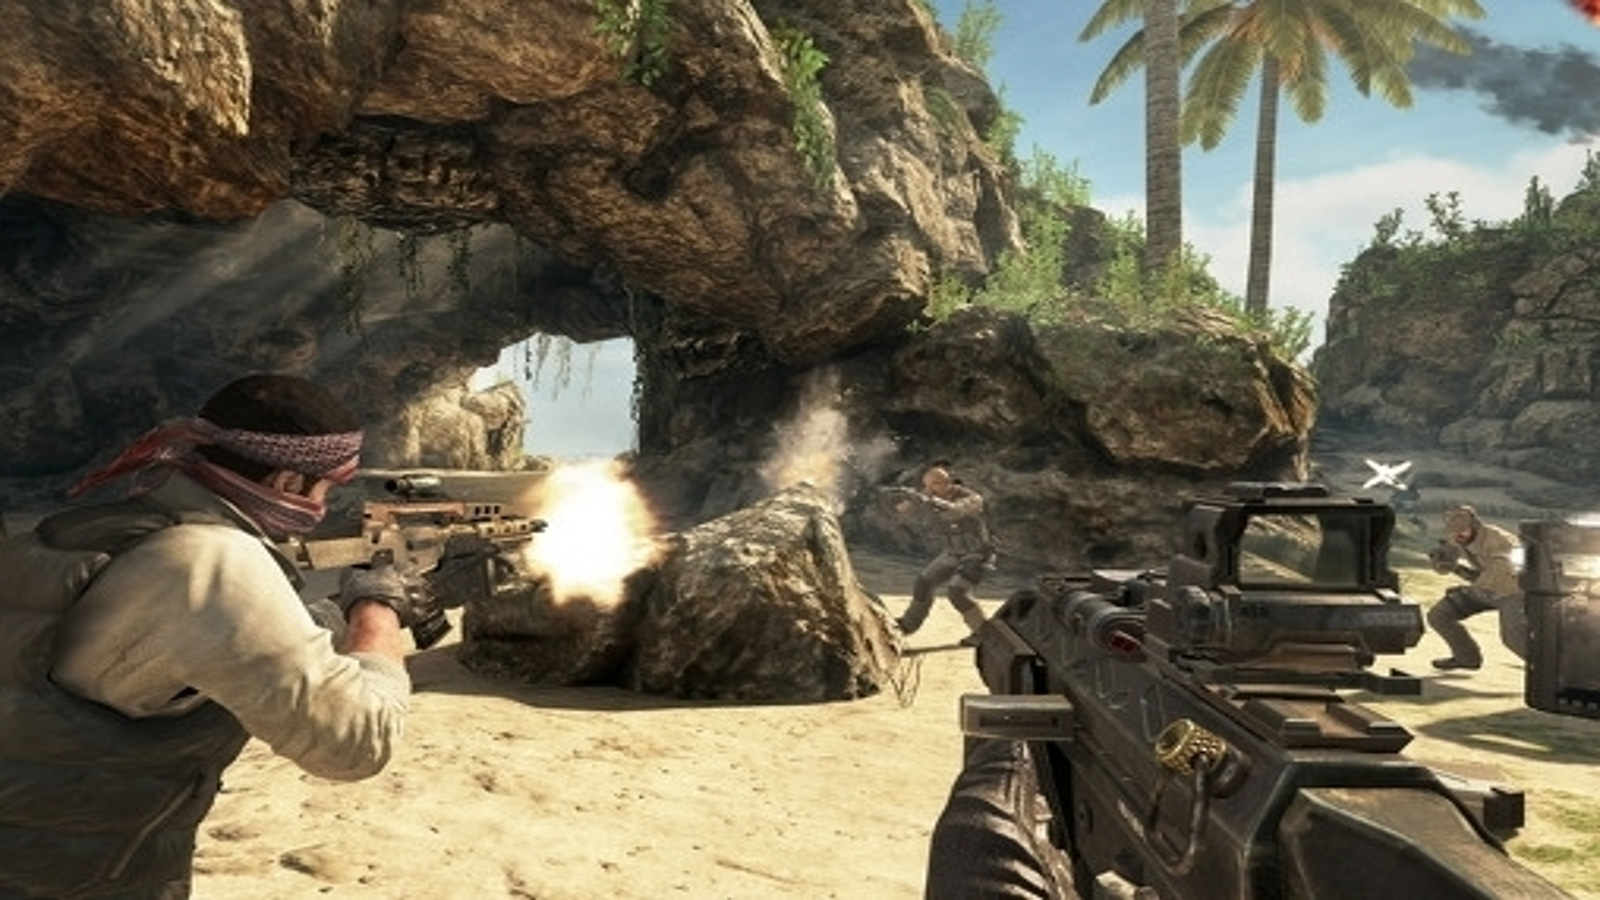 Official Call of Duty: Black Ops 2 Vengeance DLC Map Pack Preview Video 